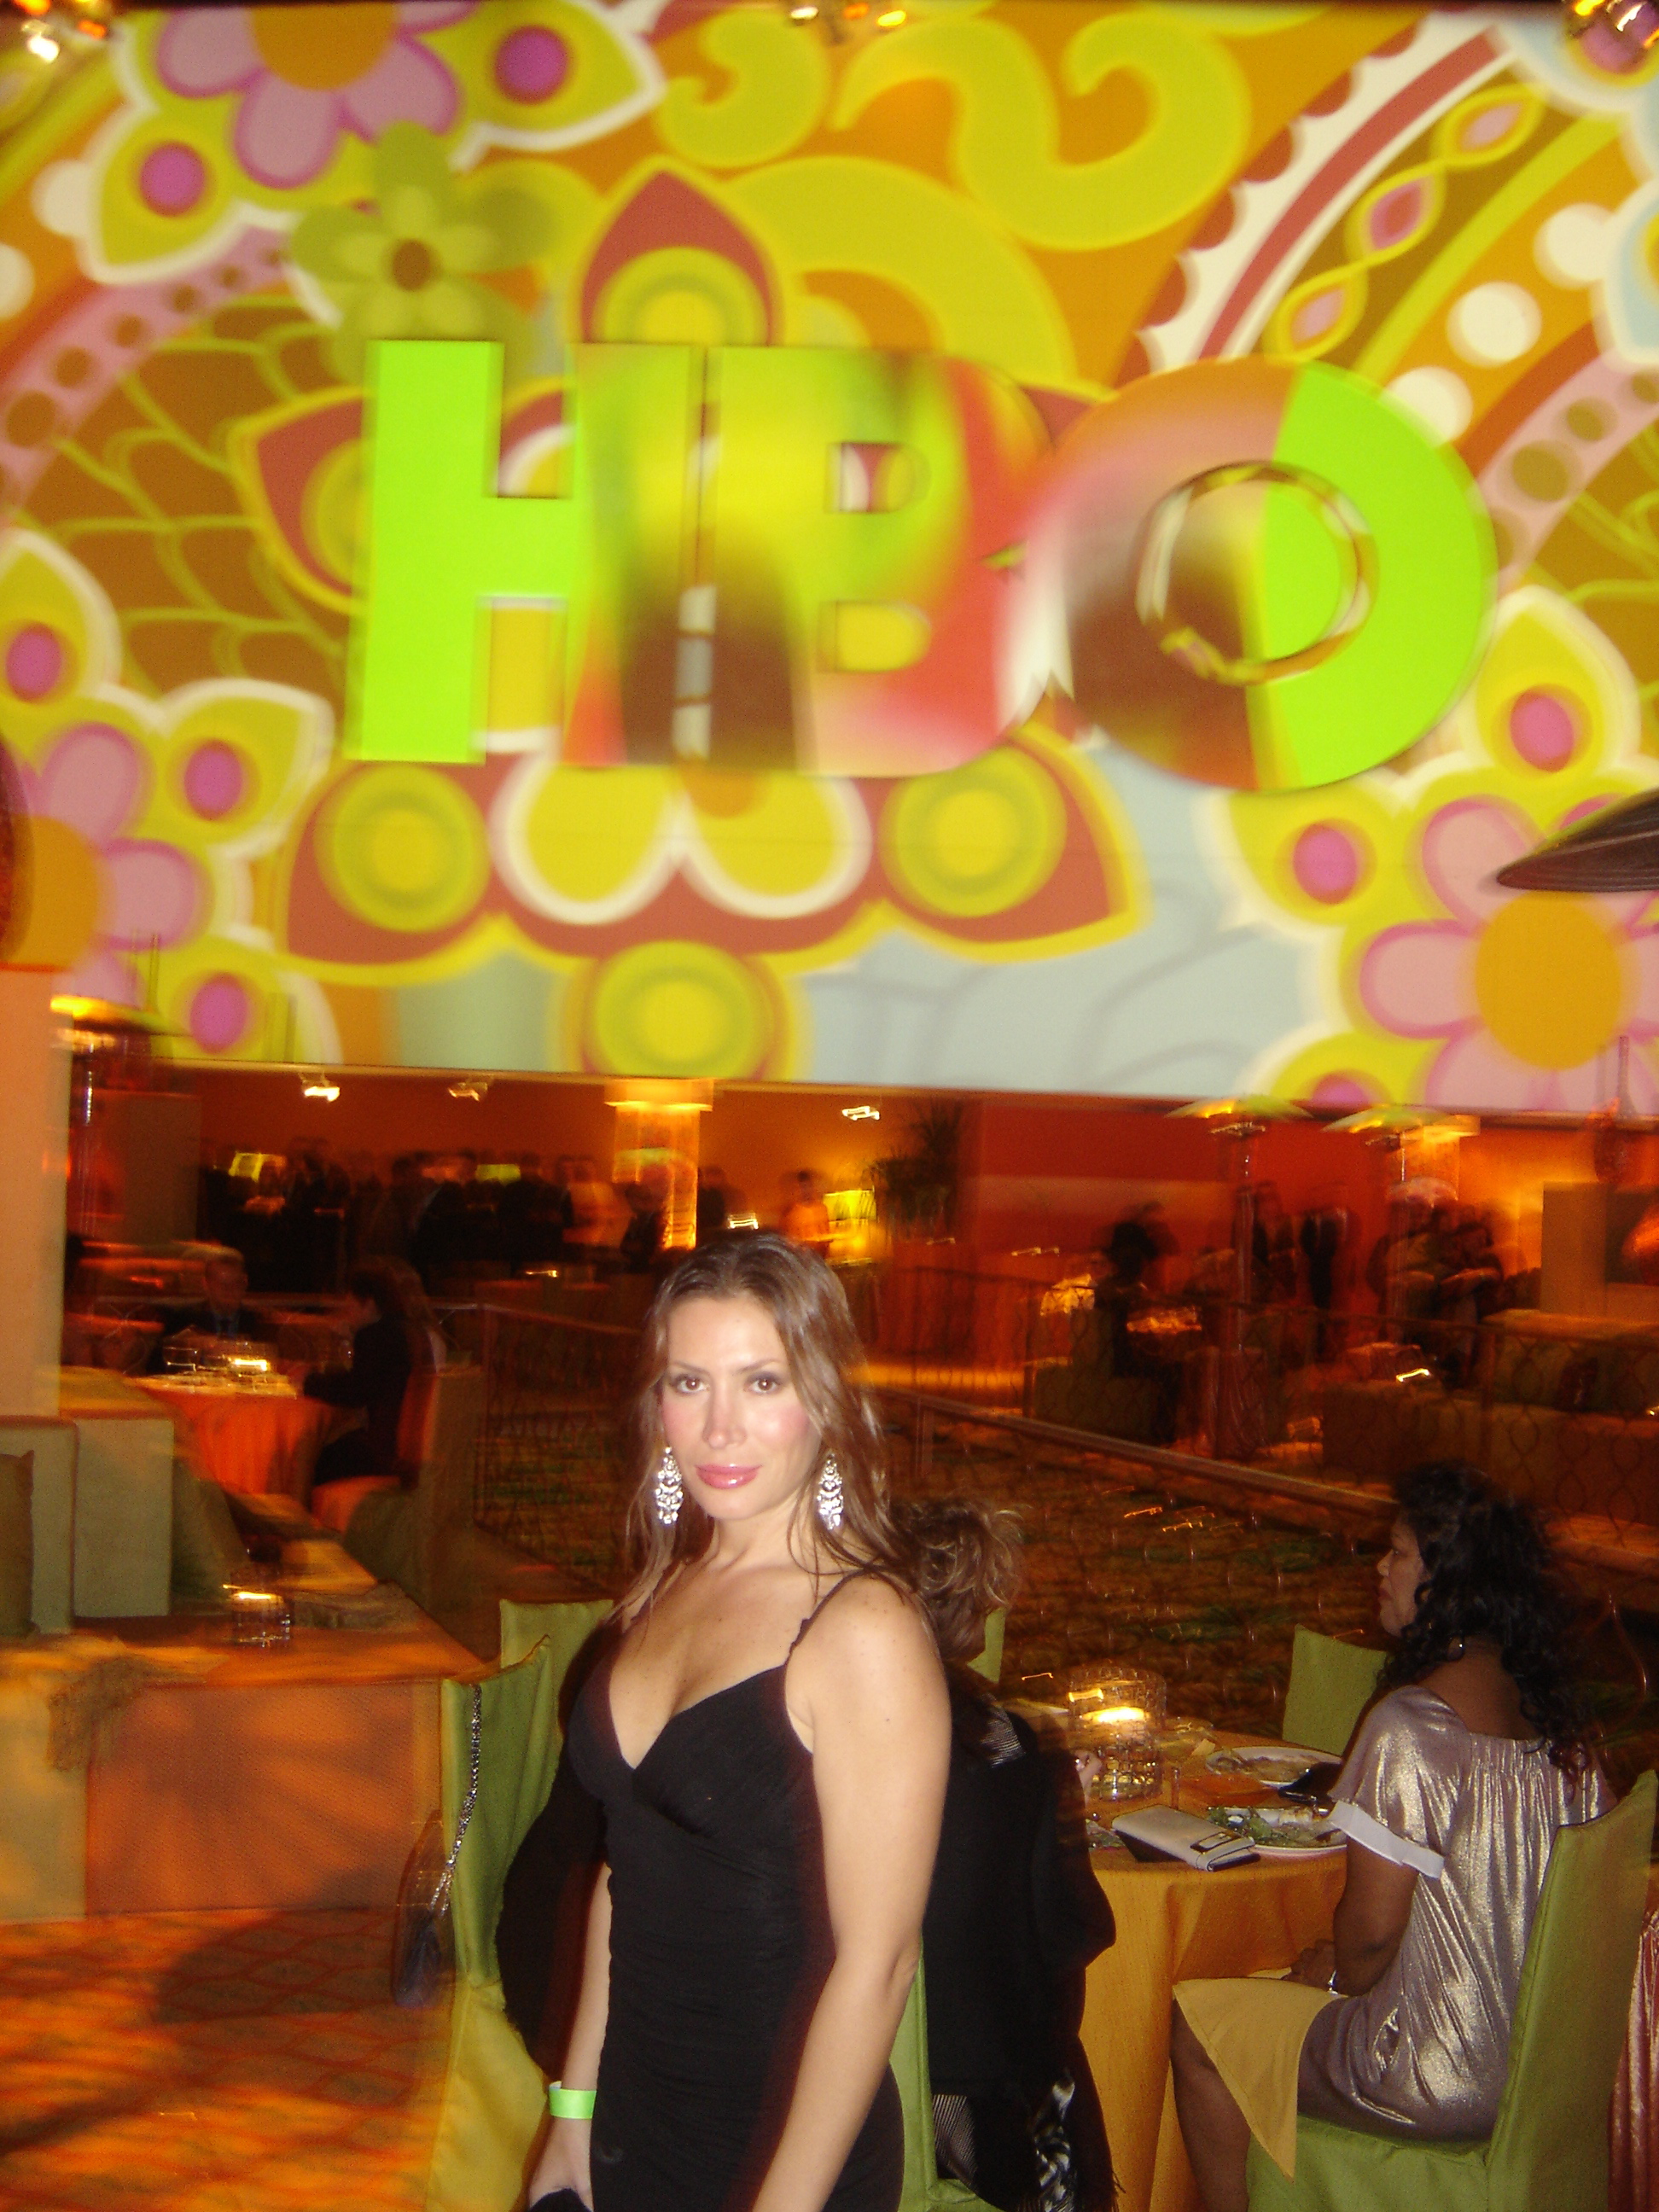 Golden Globes Party 2007 at HBO